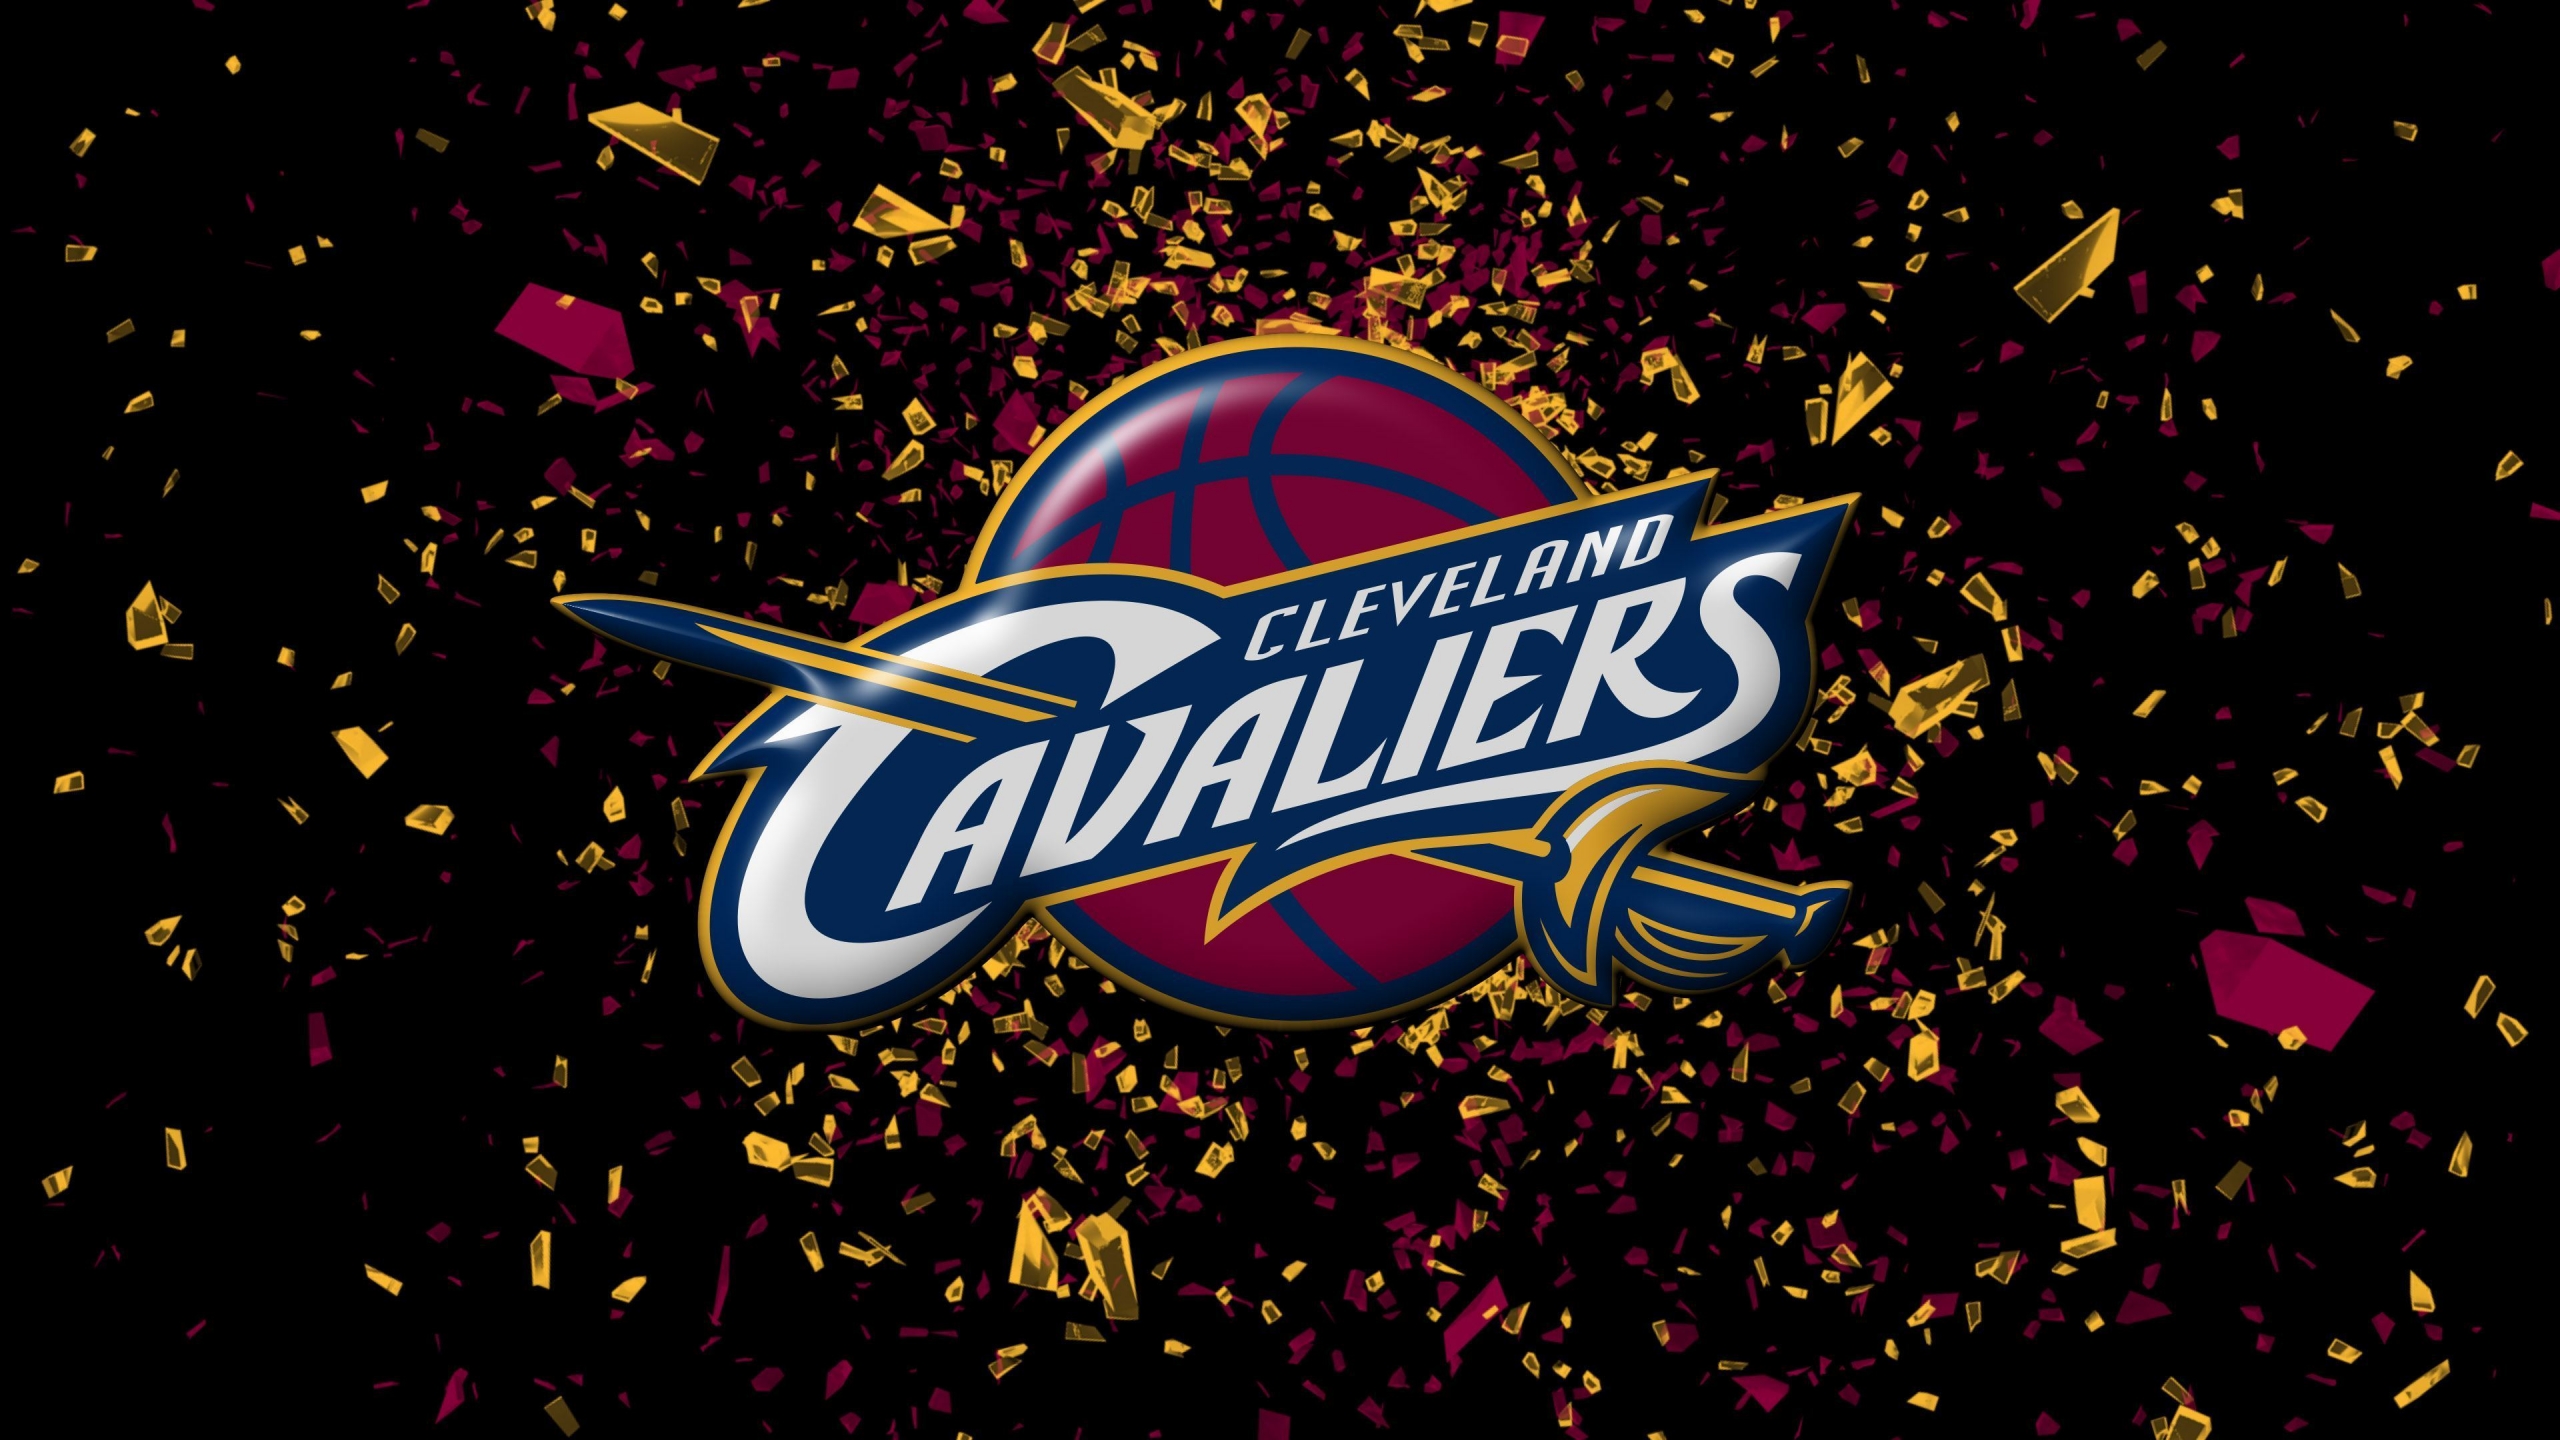 Cleveland Cavaliers for 2560x1440 HDTV resolution